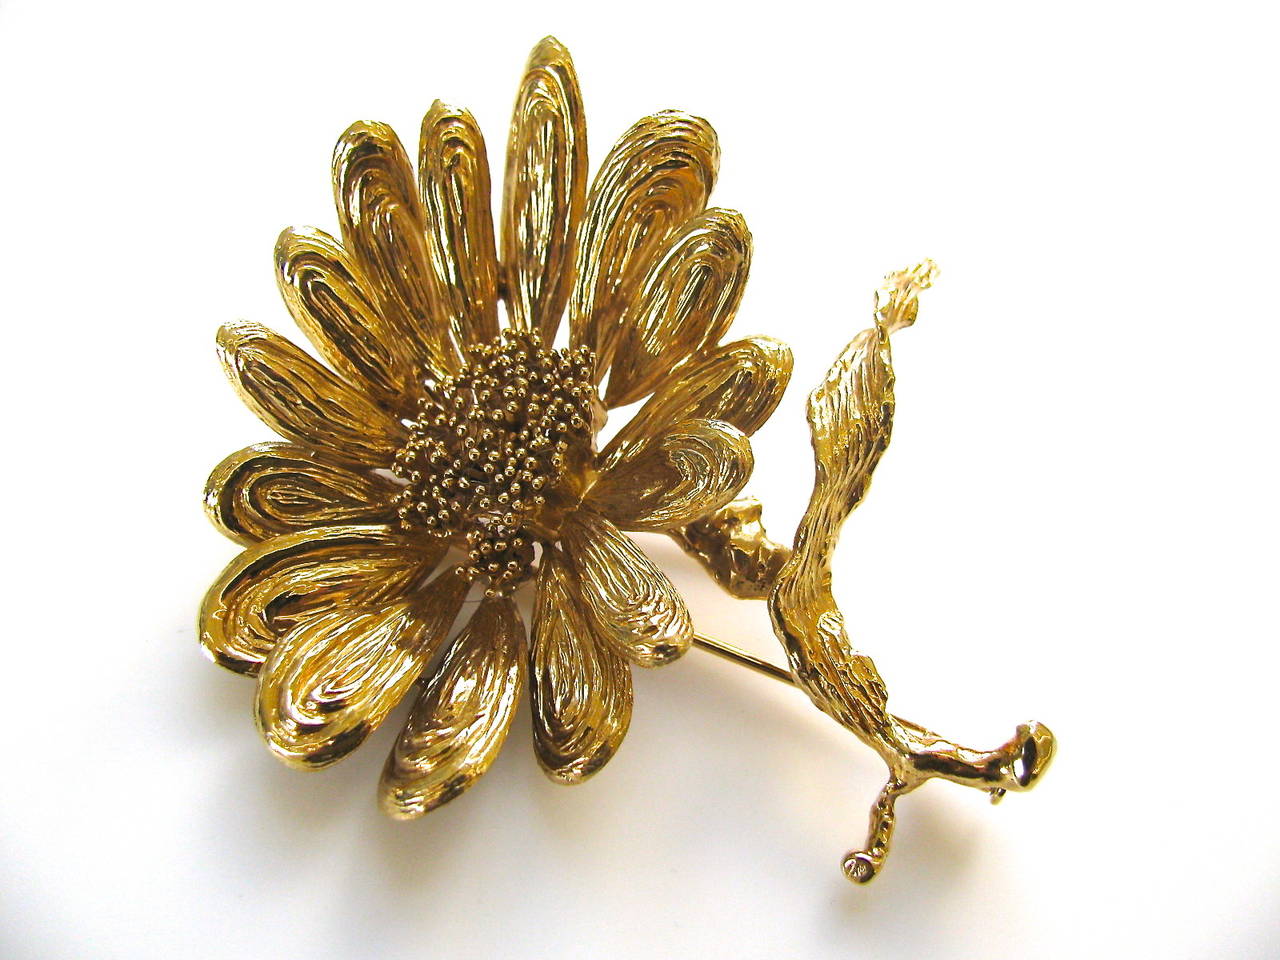 A charming gold flower pin by Chaumet. The 2 3/4